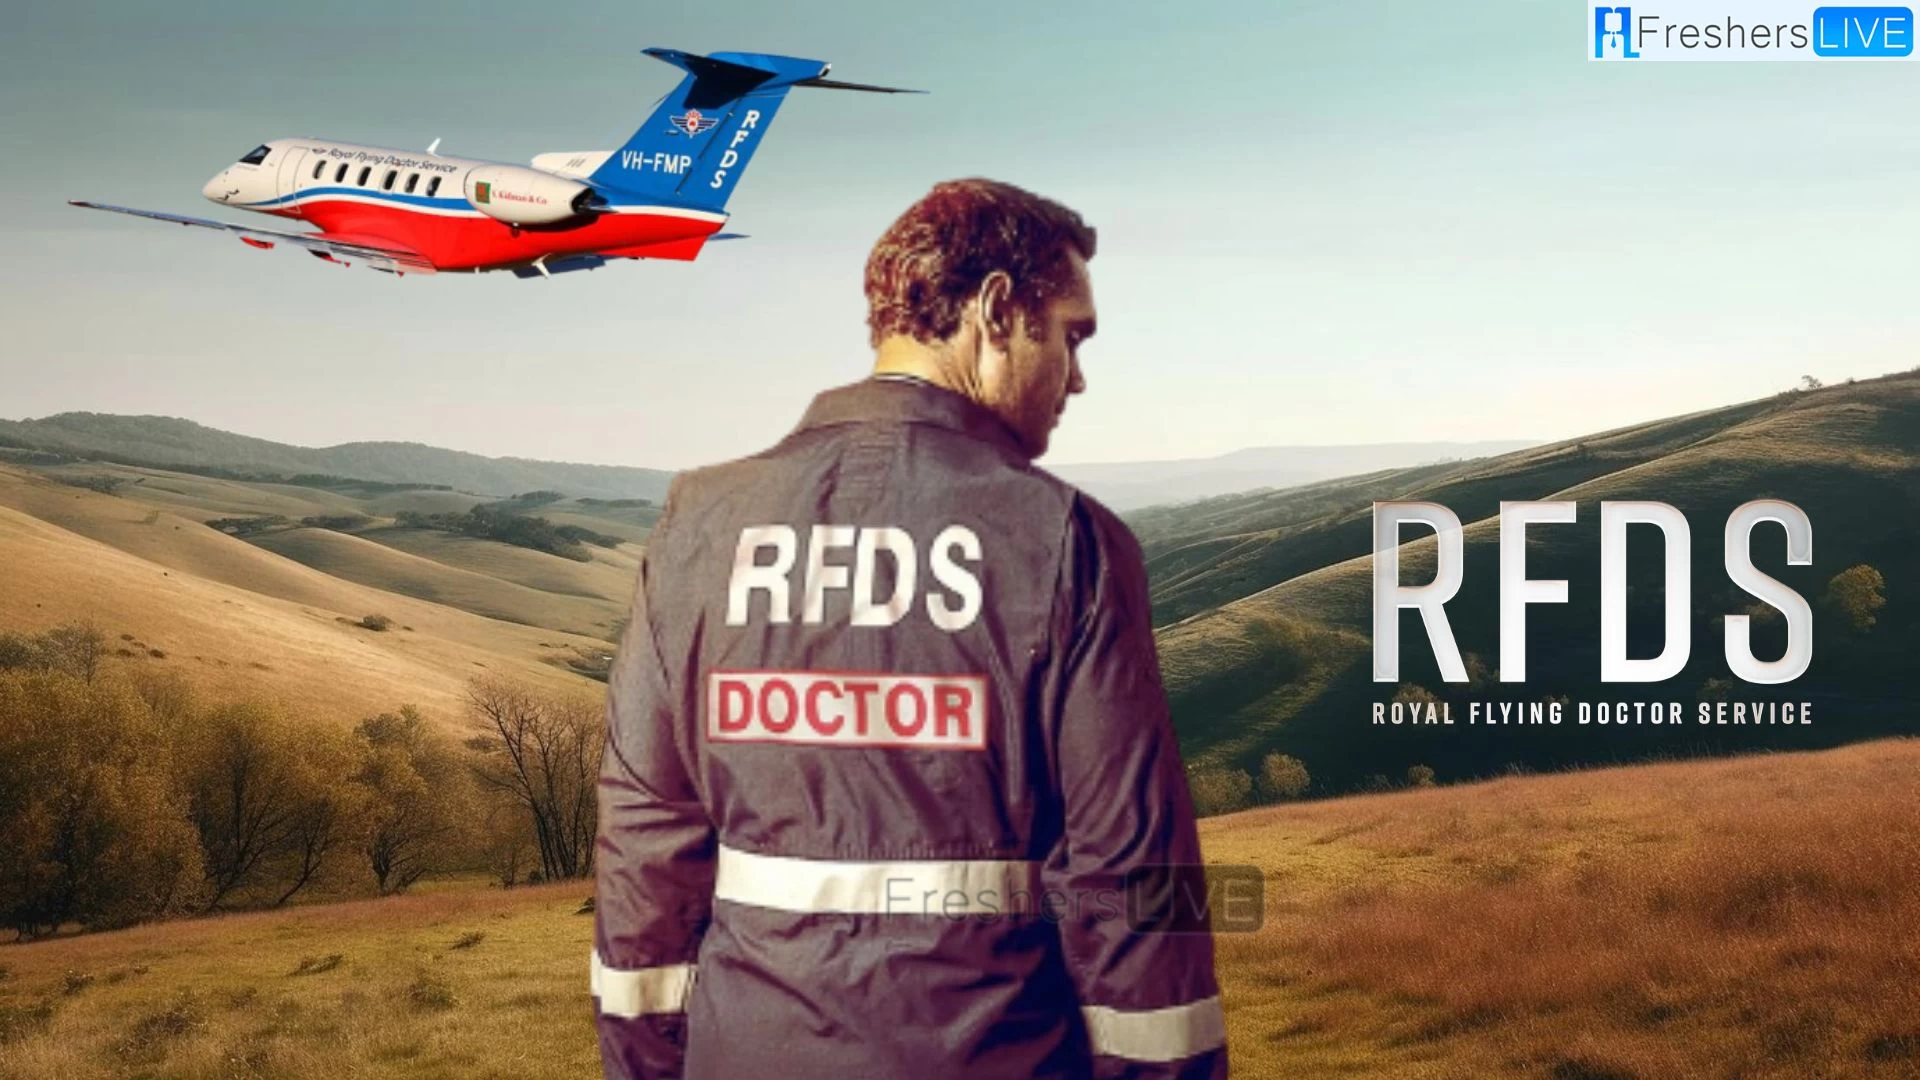 Will There Be a Season 3 of RFDS? RFDS Season 3 Release Date